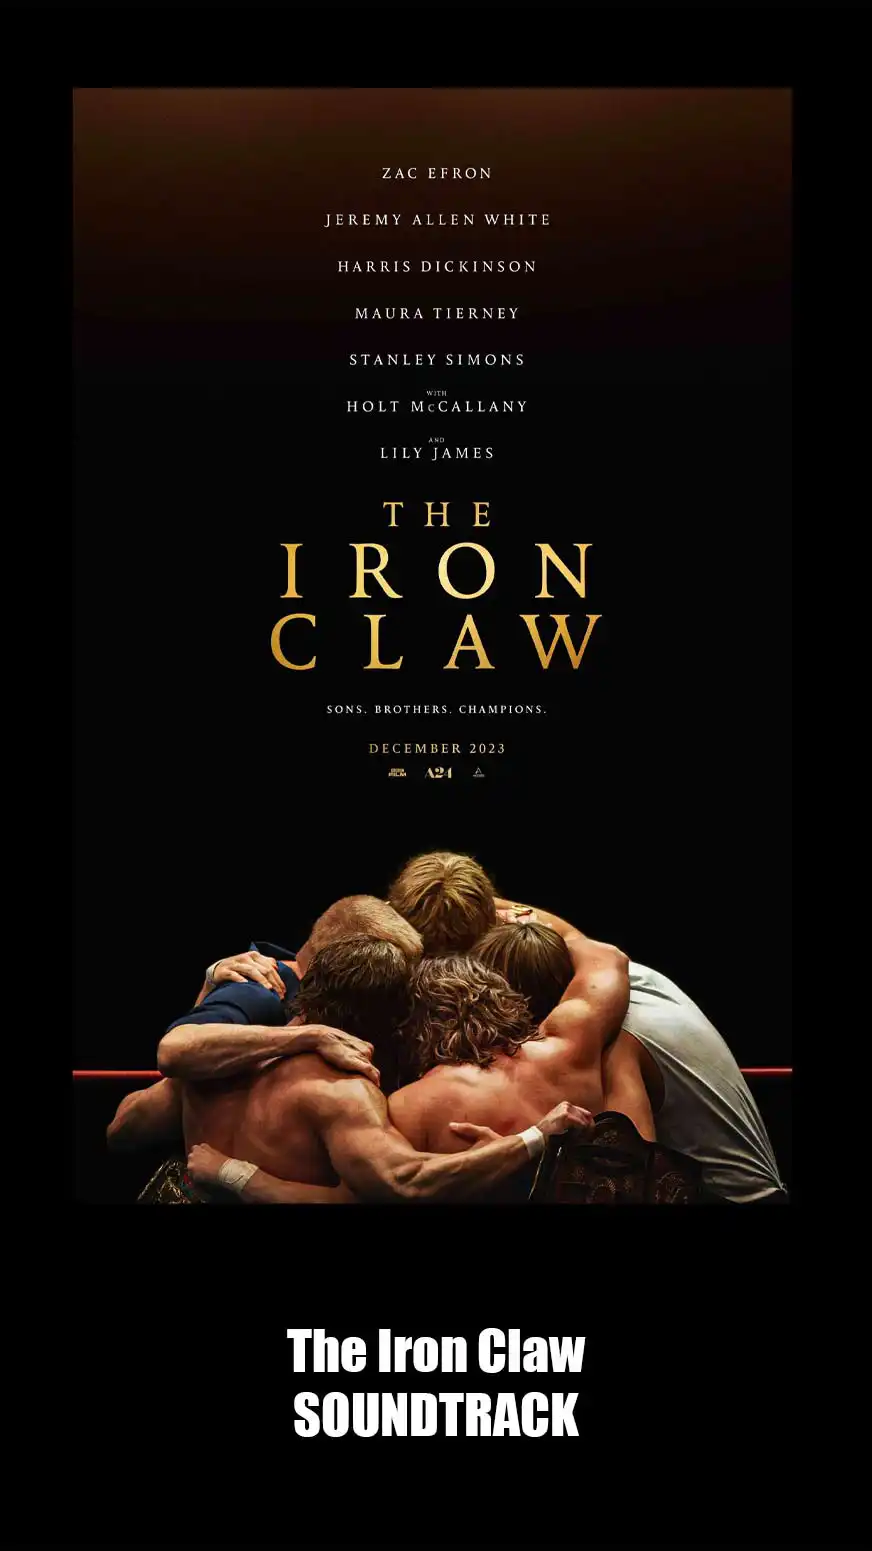 The Iron Claw Soundtrack 2023